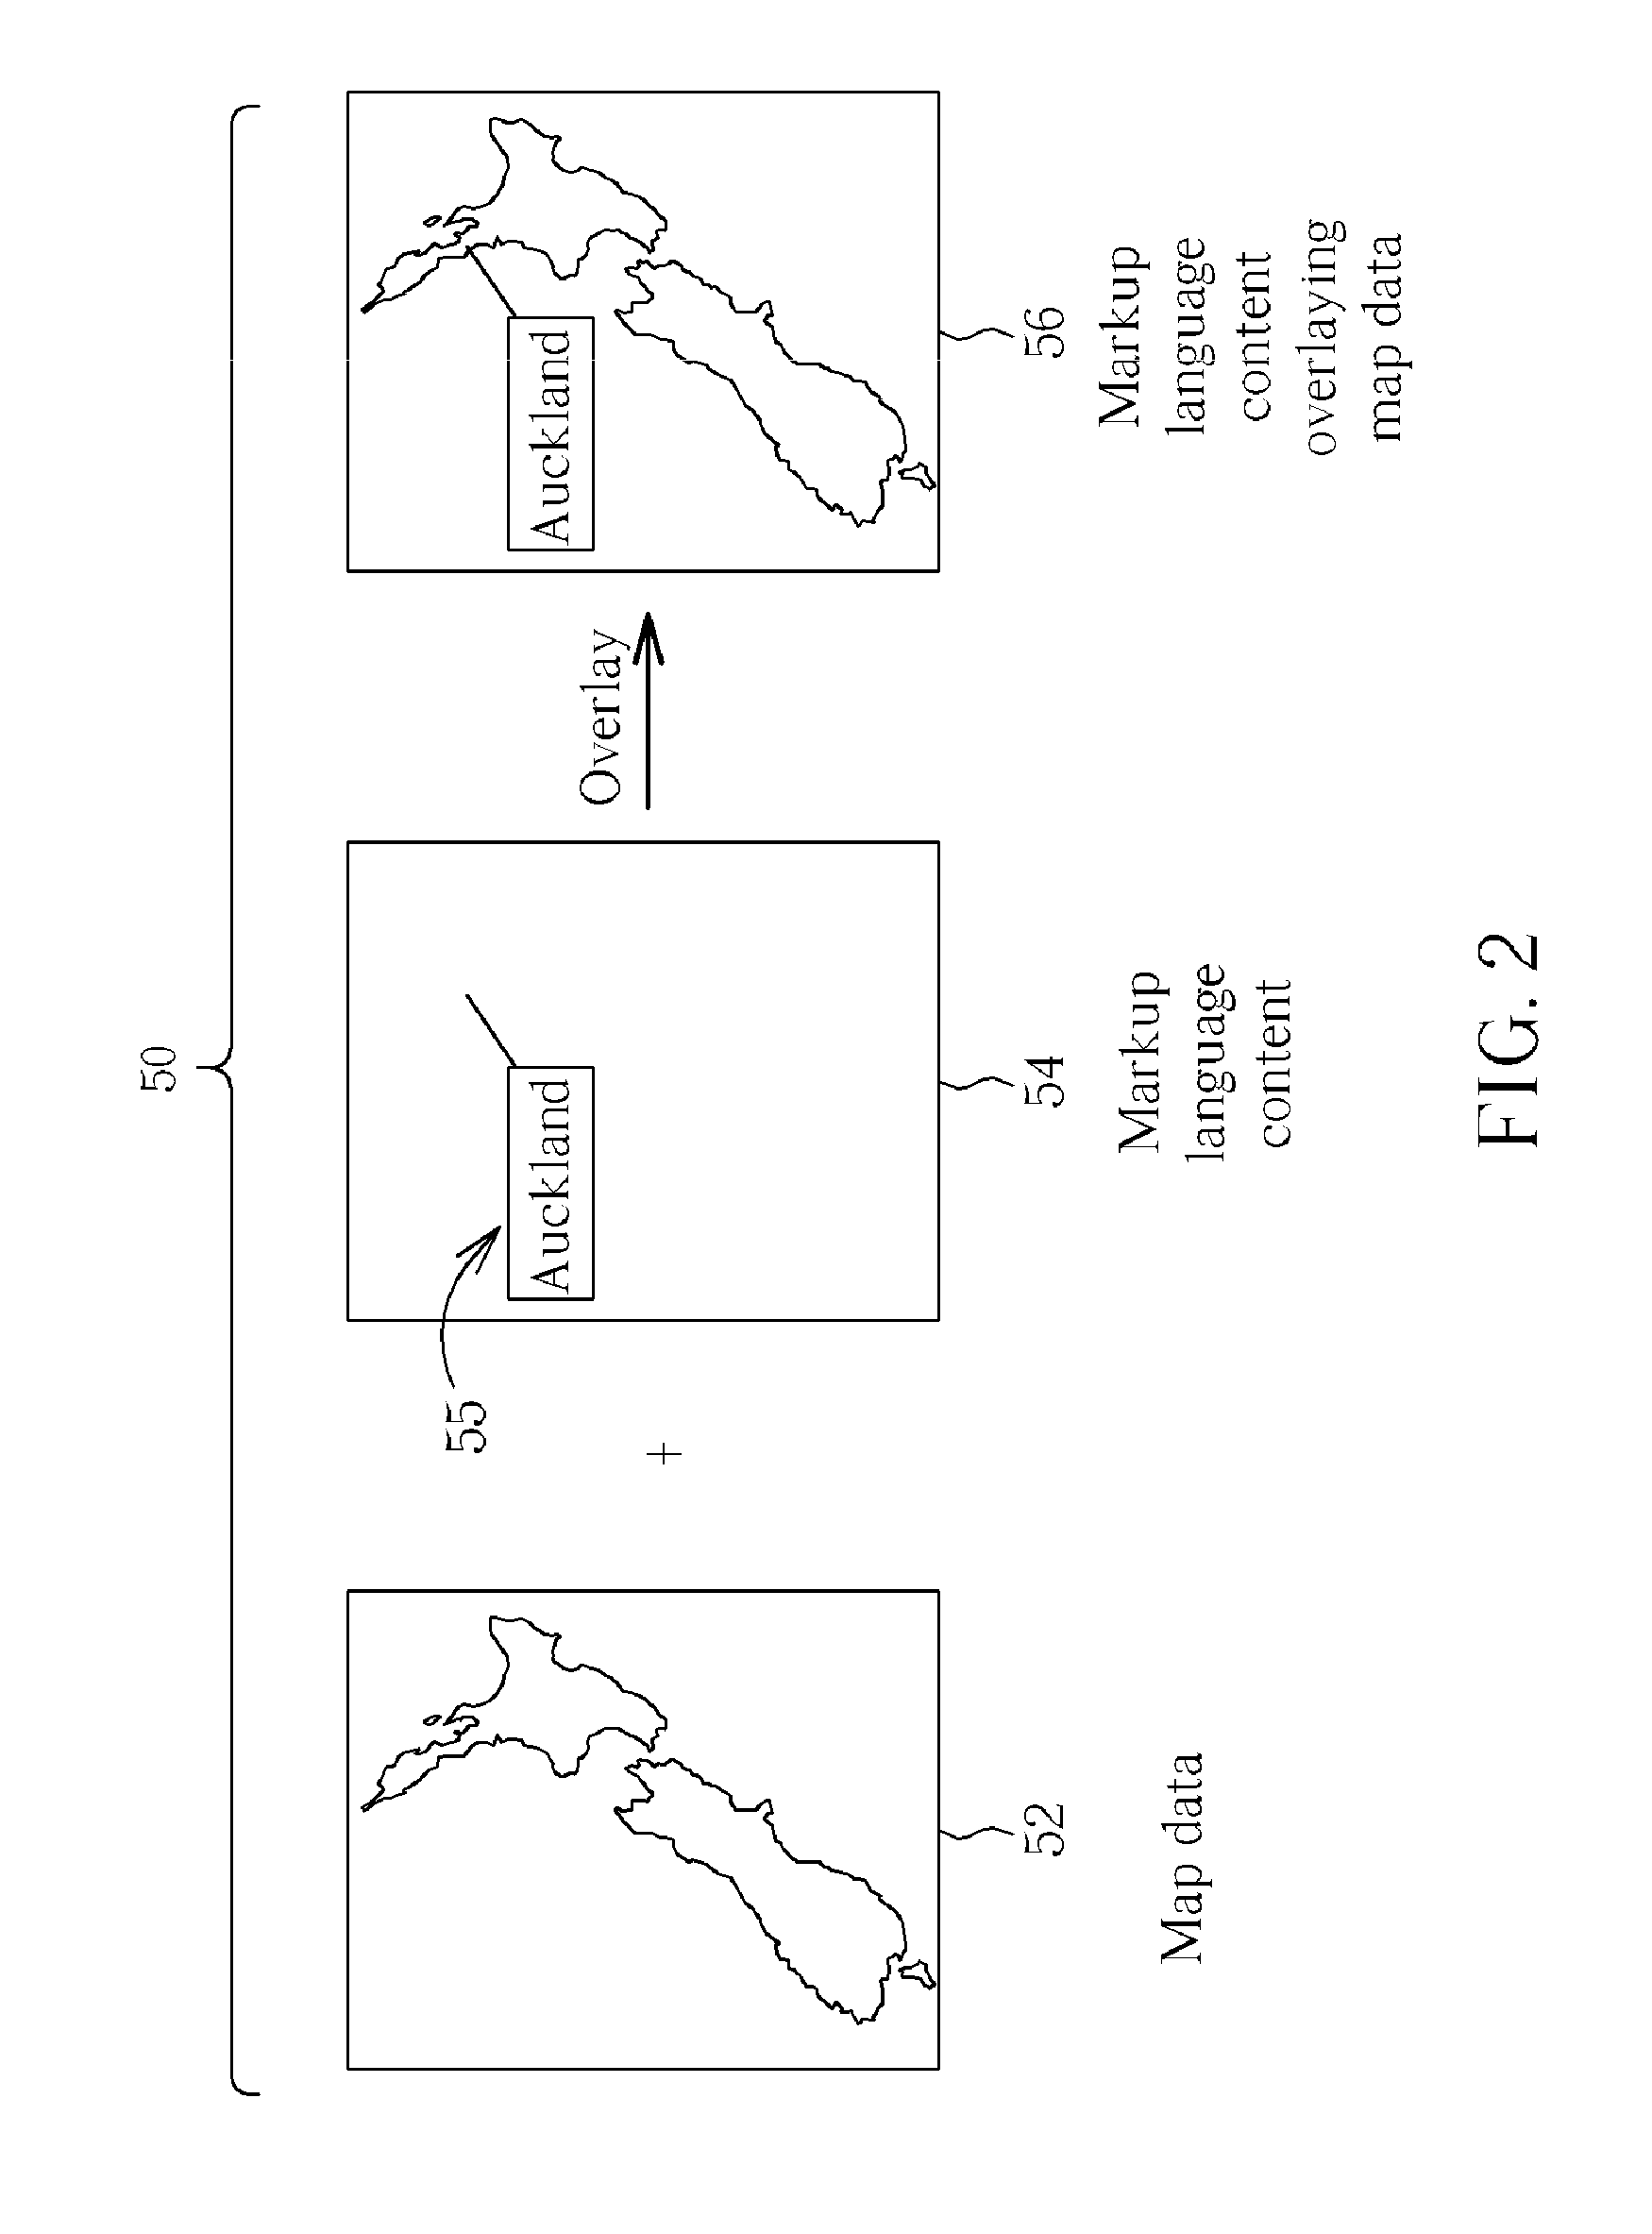 Personal navigation device and related method for dynamically downloading markup language content and overlaying existing map data